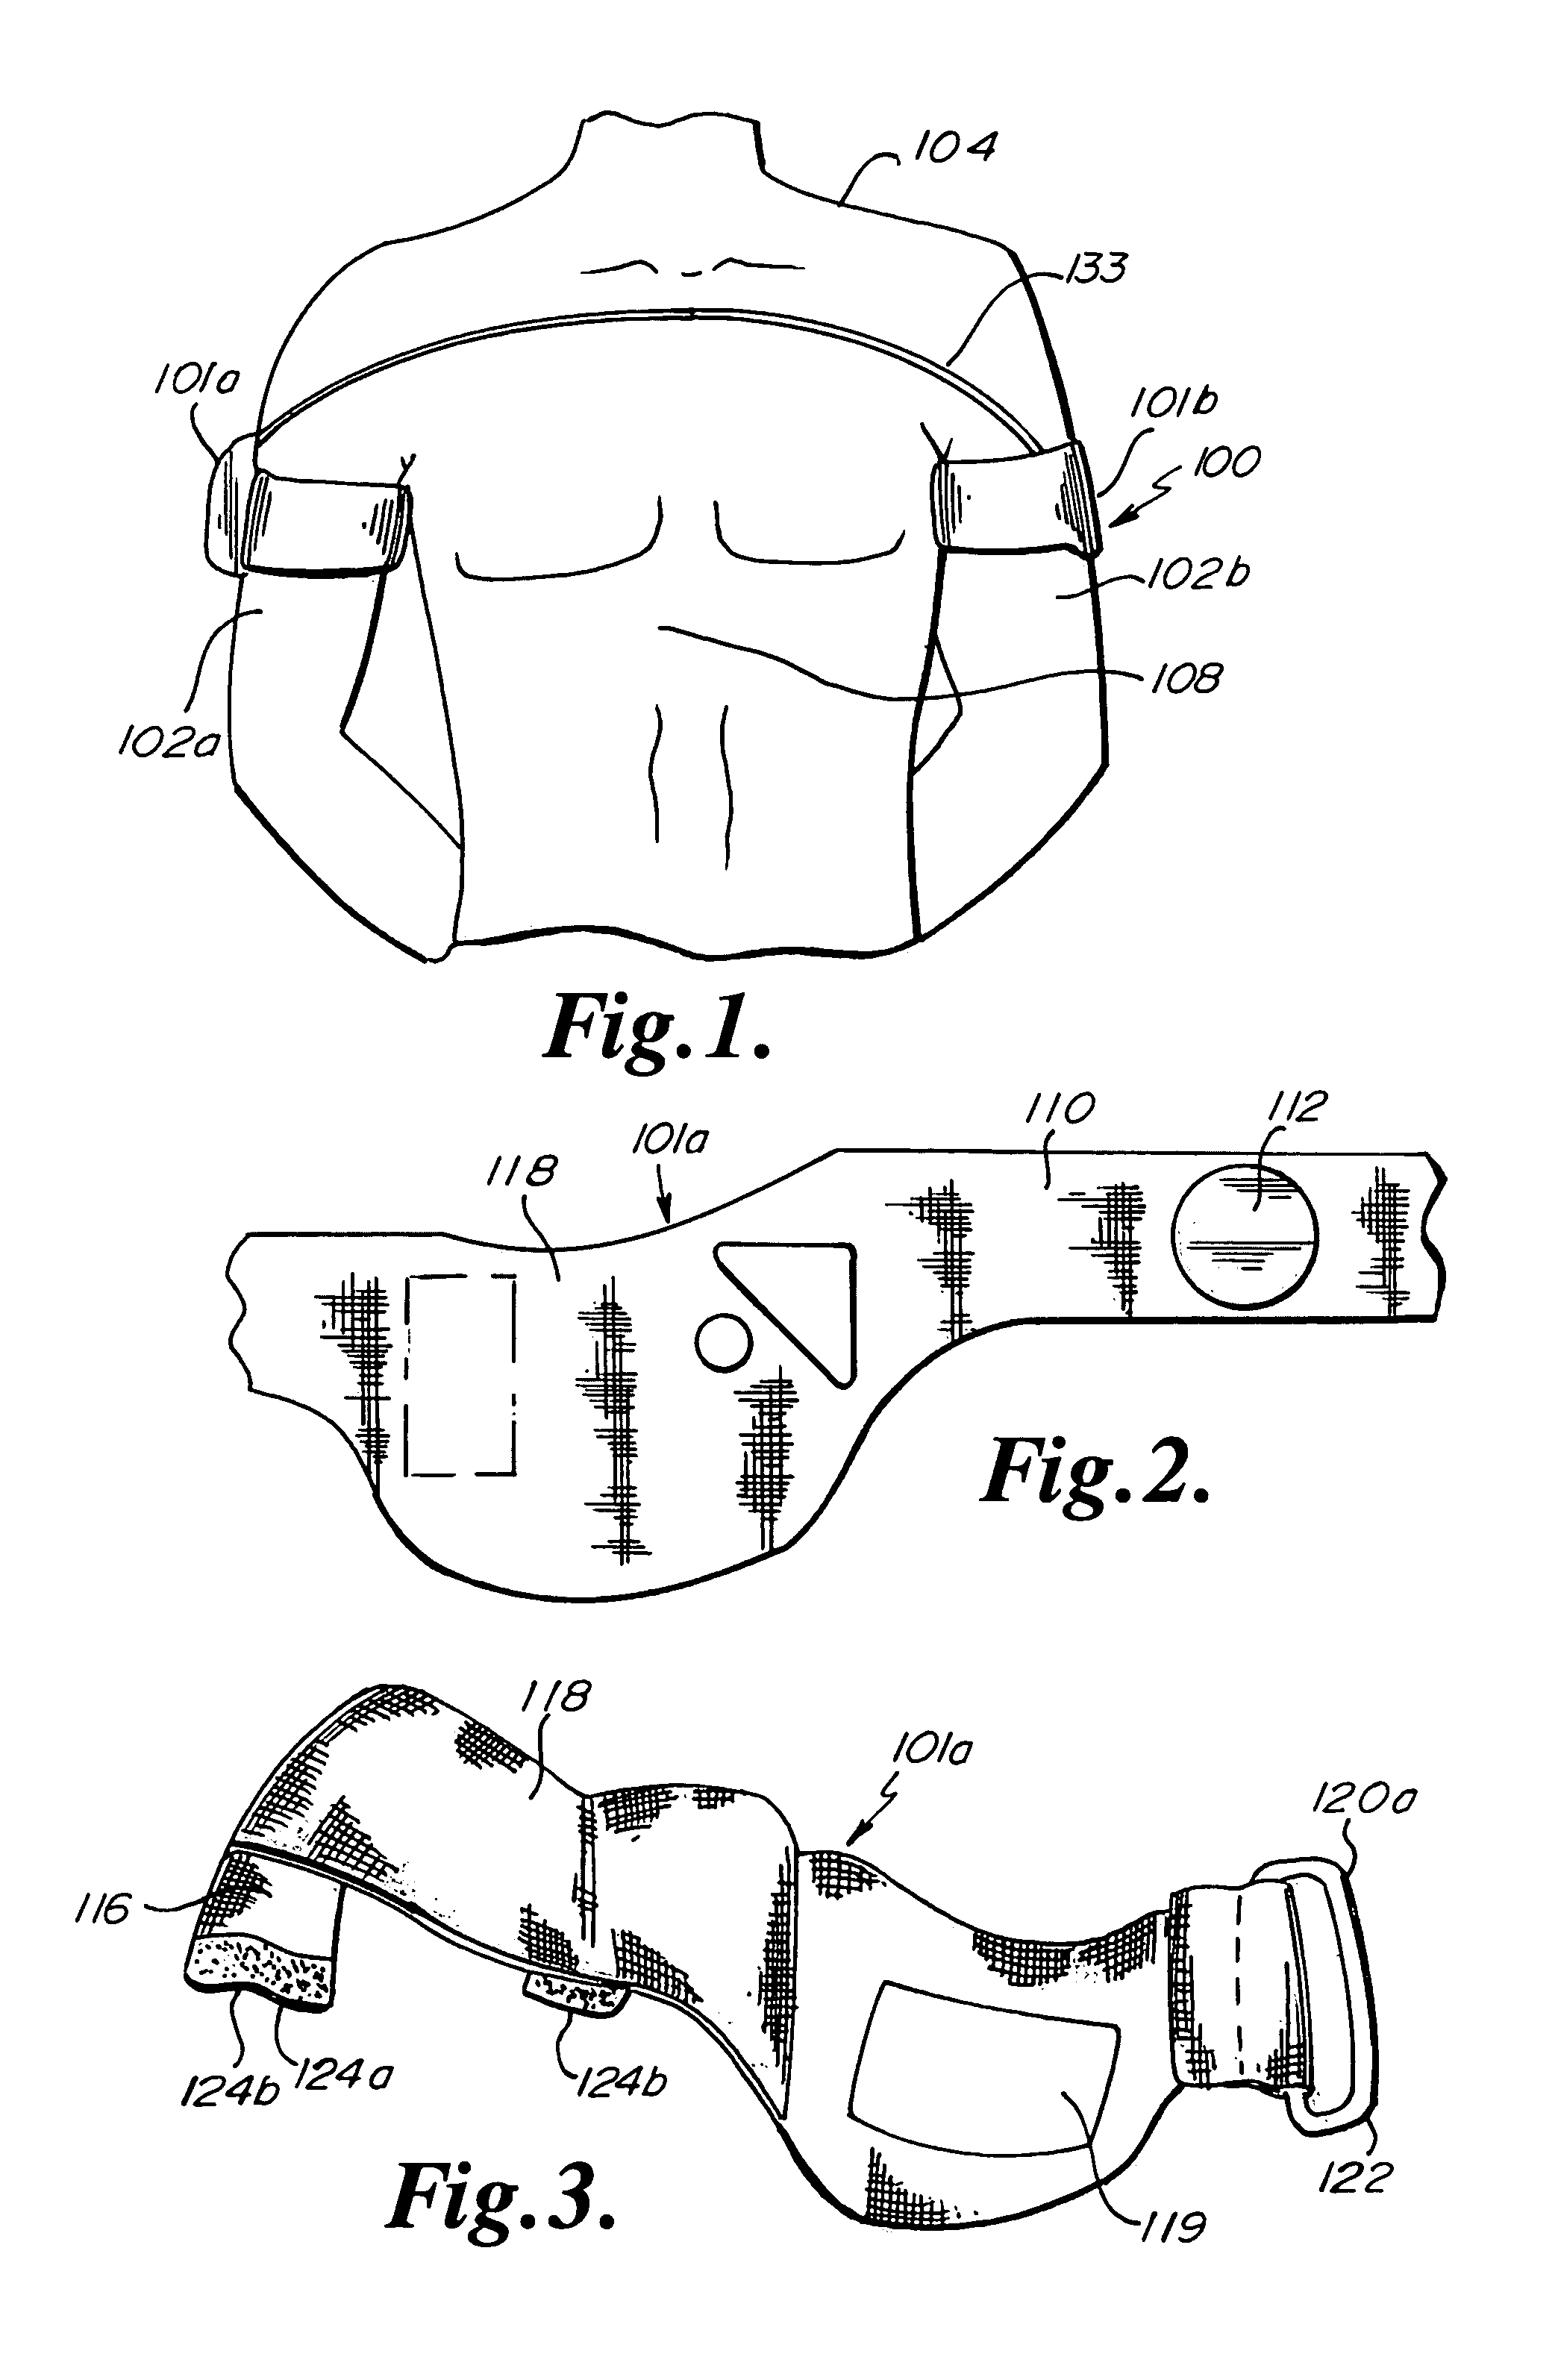 Method of applying electrical signals to a patient and automatic wearable external defibrillator